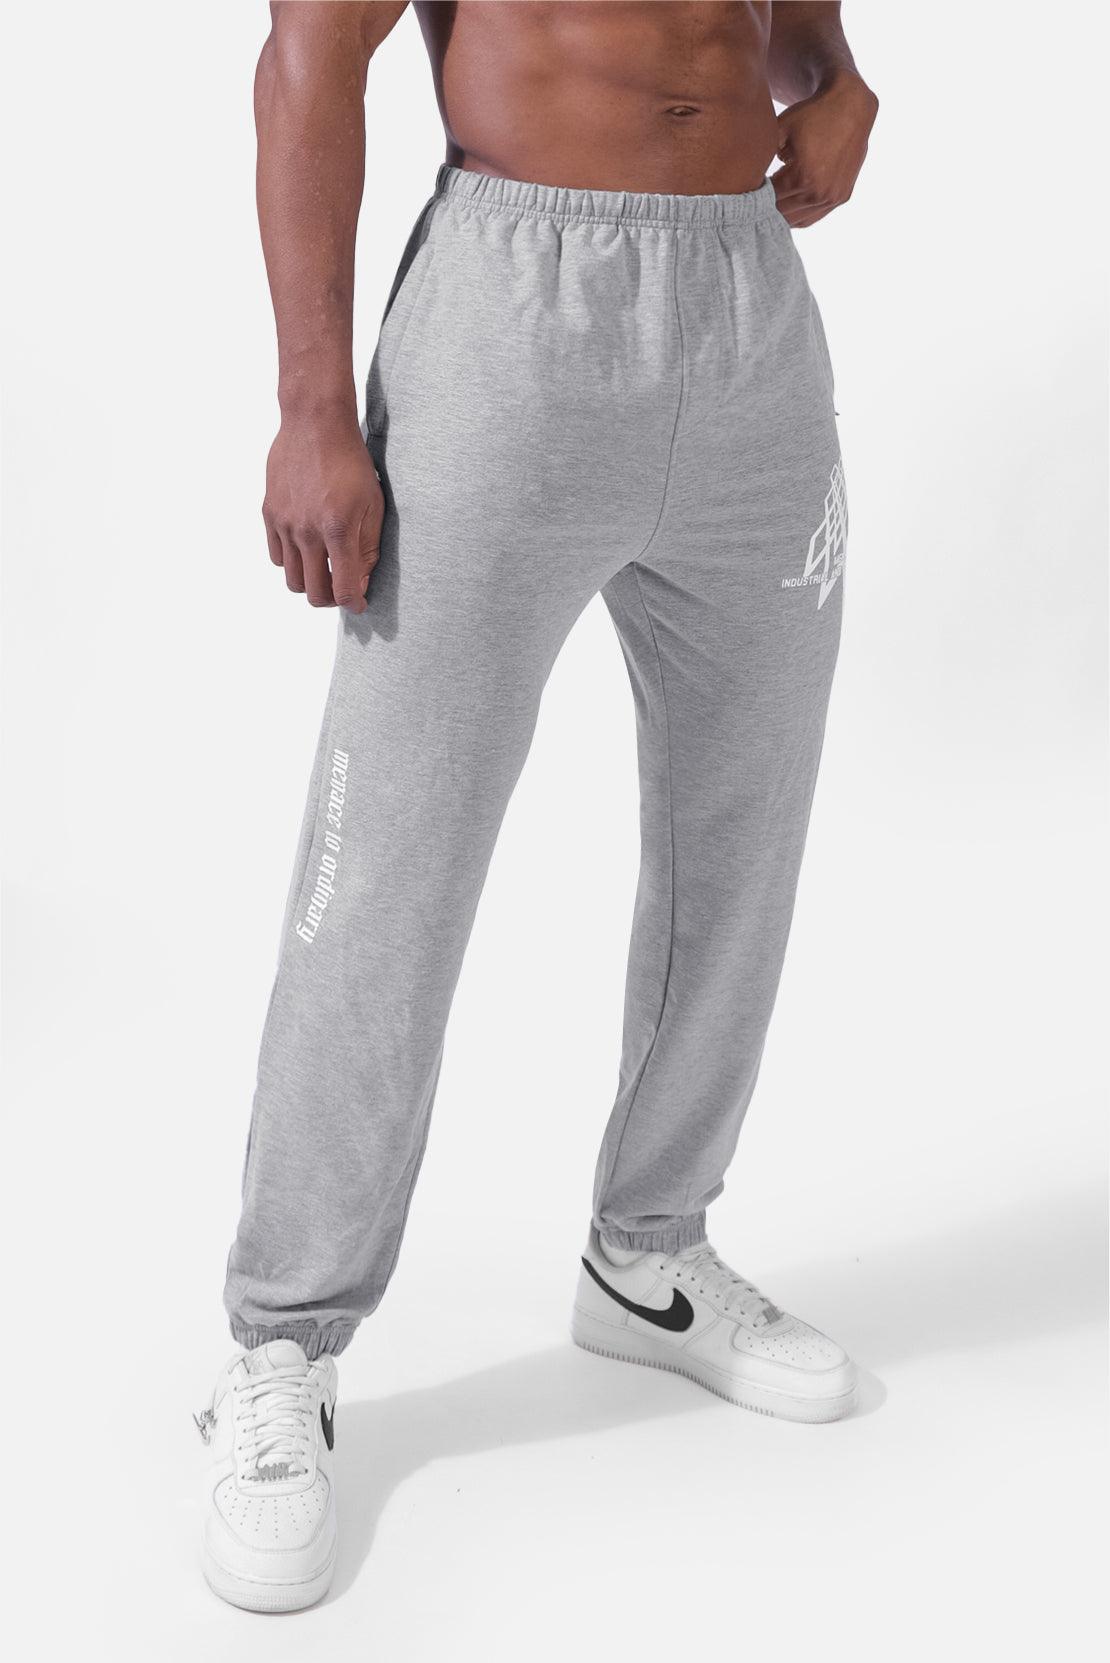 Rest Day Lightweight Joggers - Light Gray - Jed North